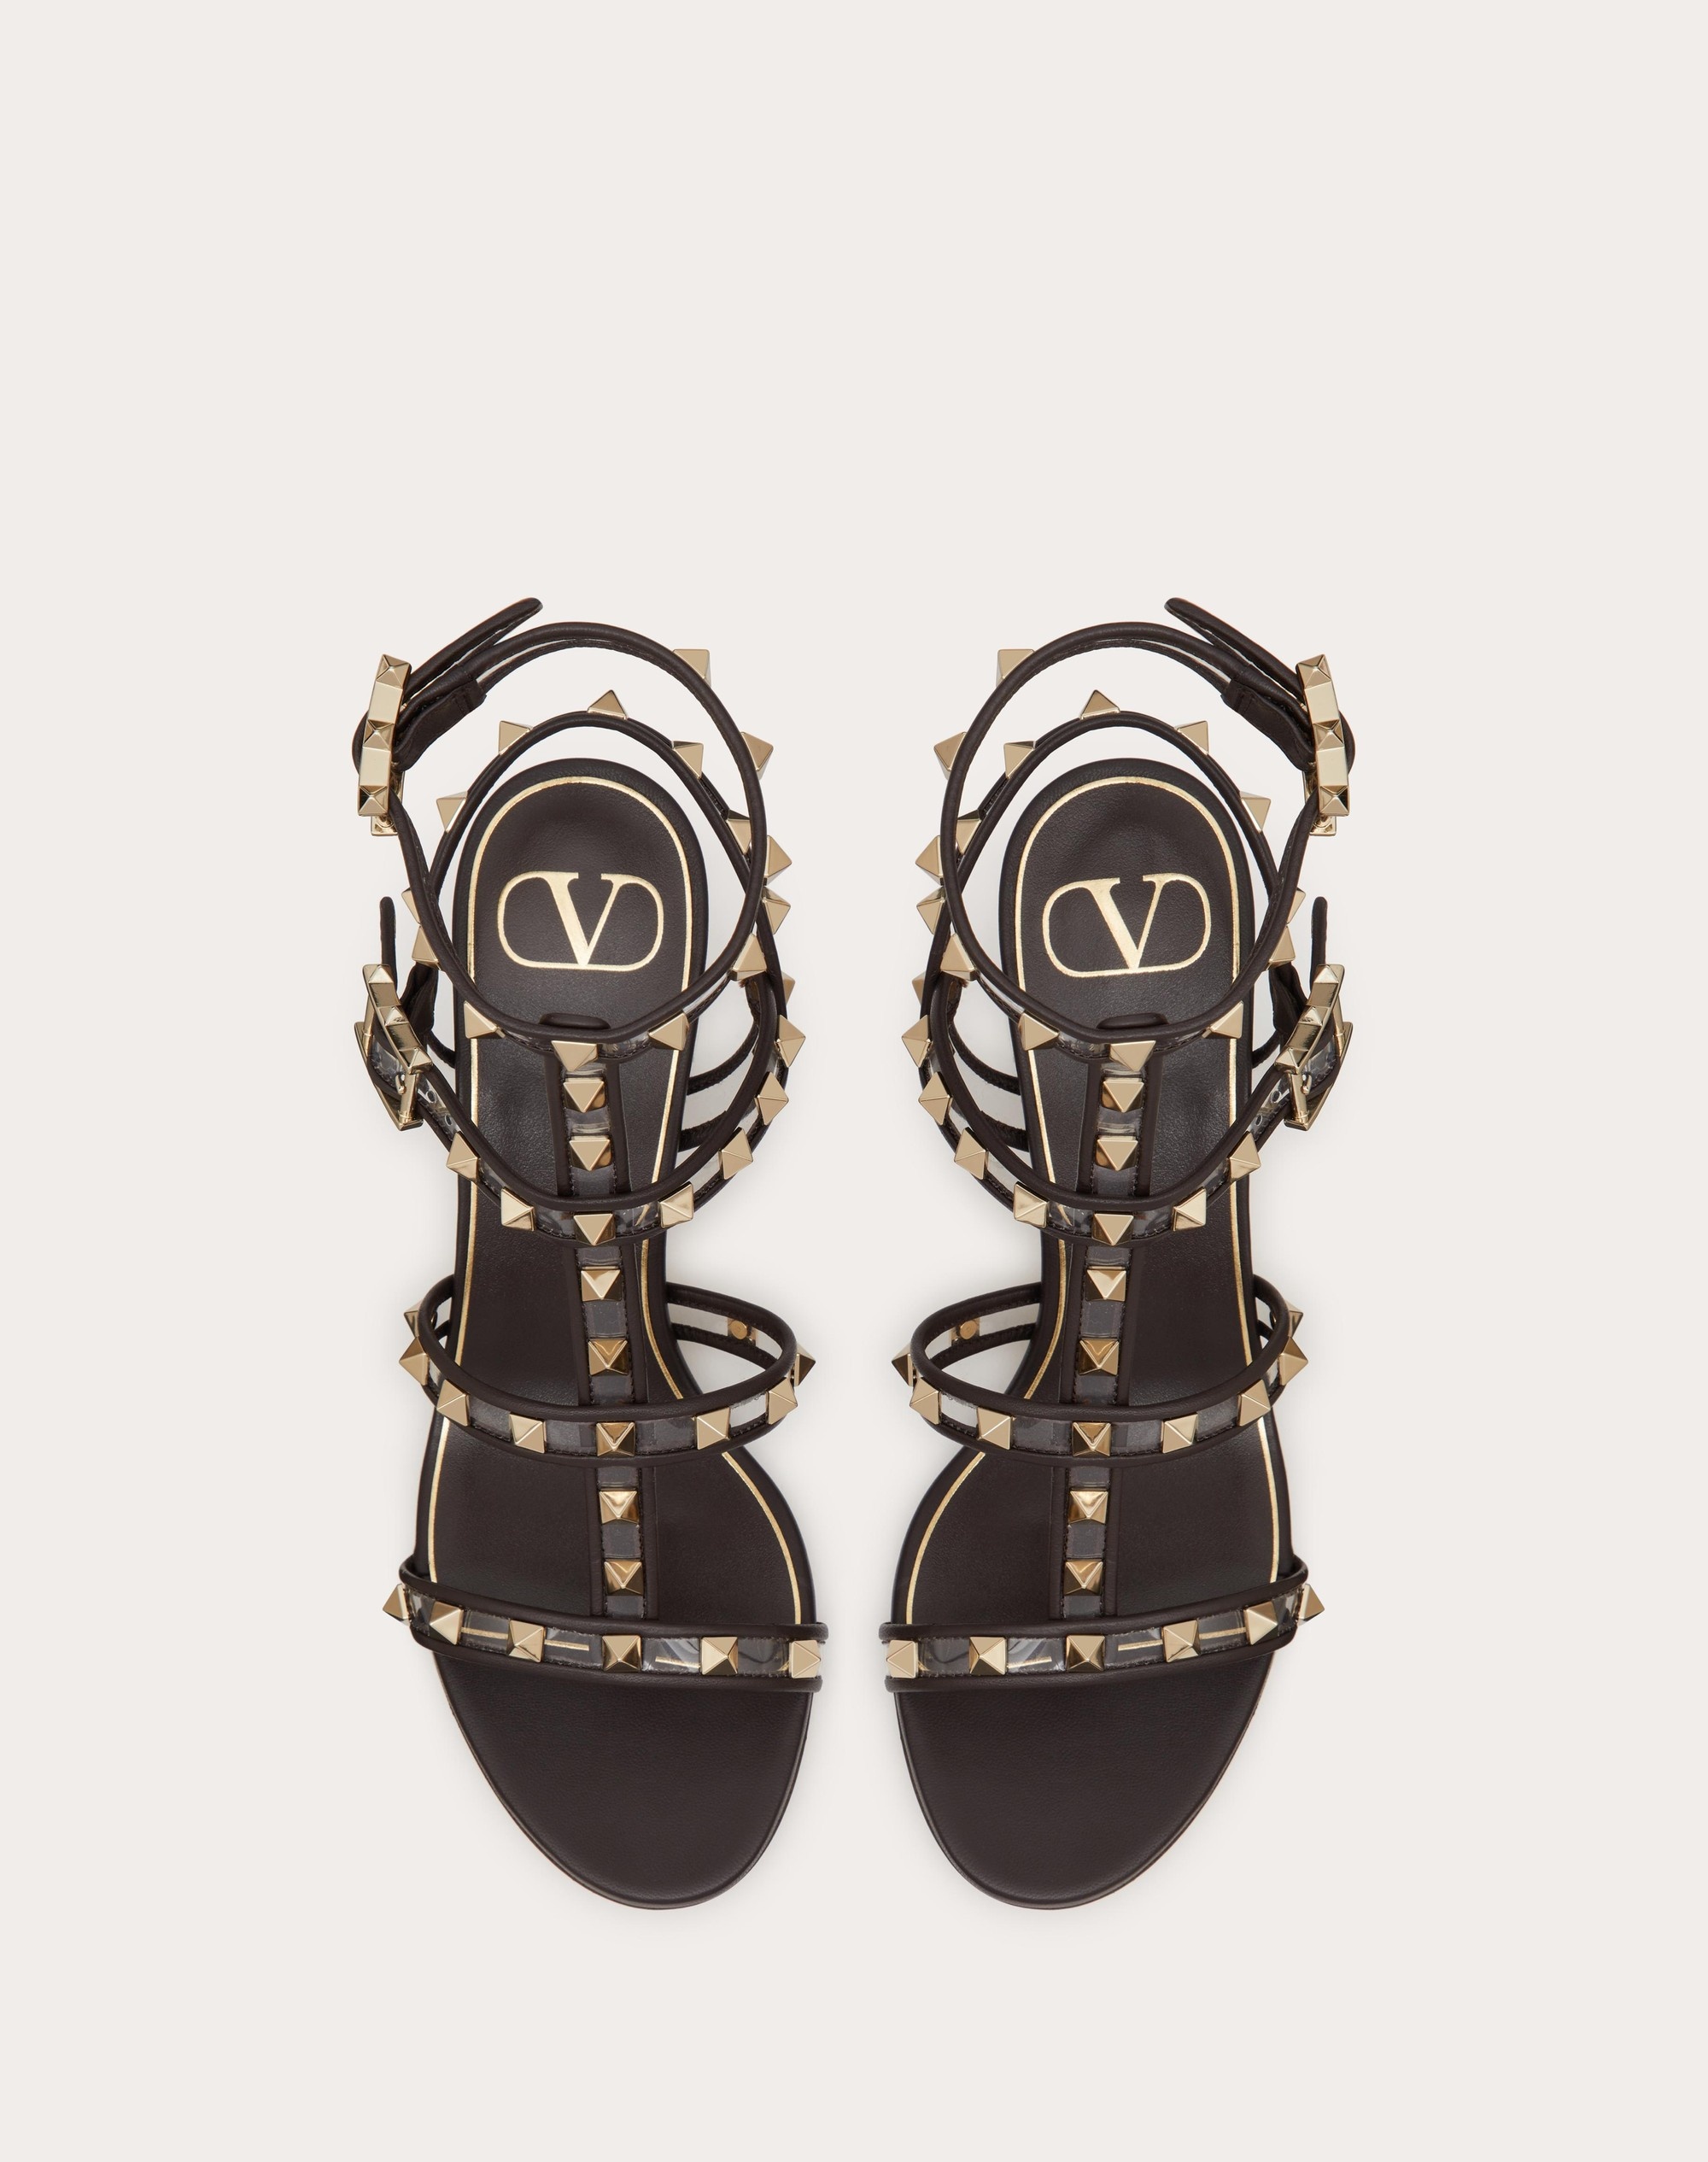 ROCKSTUD SANDAL IN POLYMER MATERIAL WITH STRAPS AND PLEXI HEEL 60MM - 4